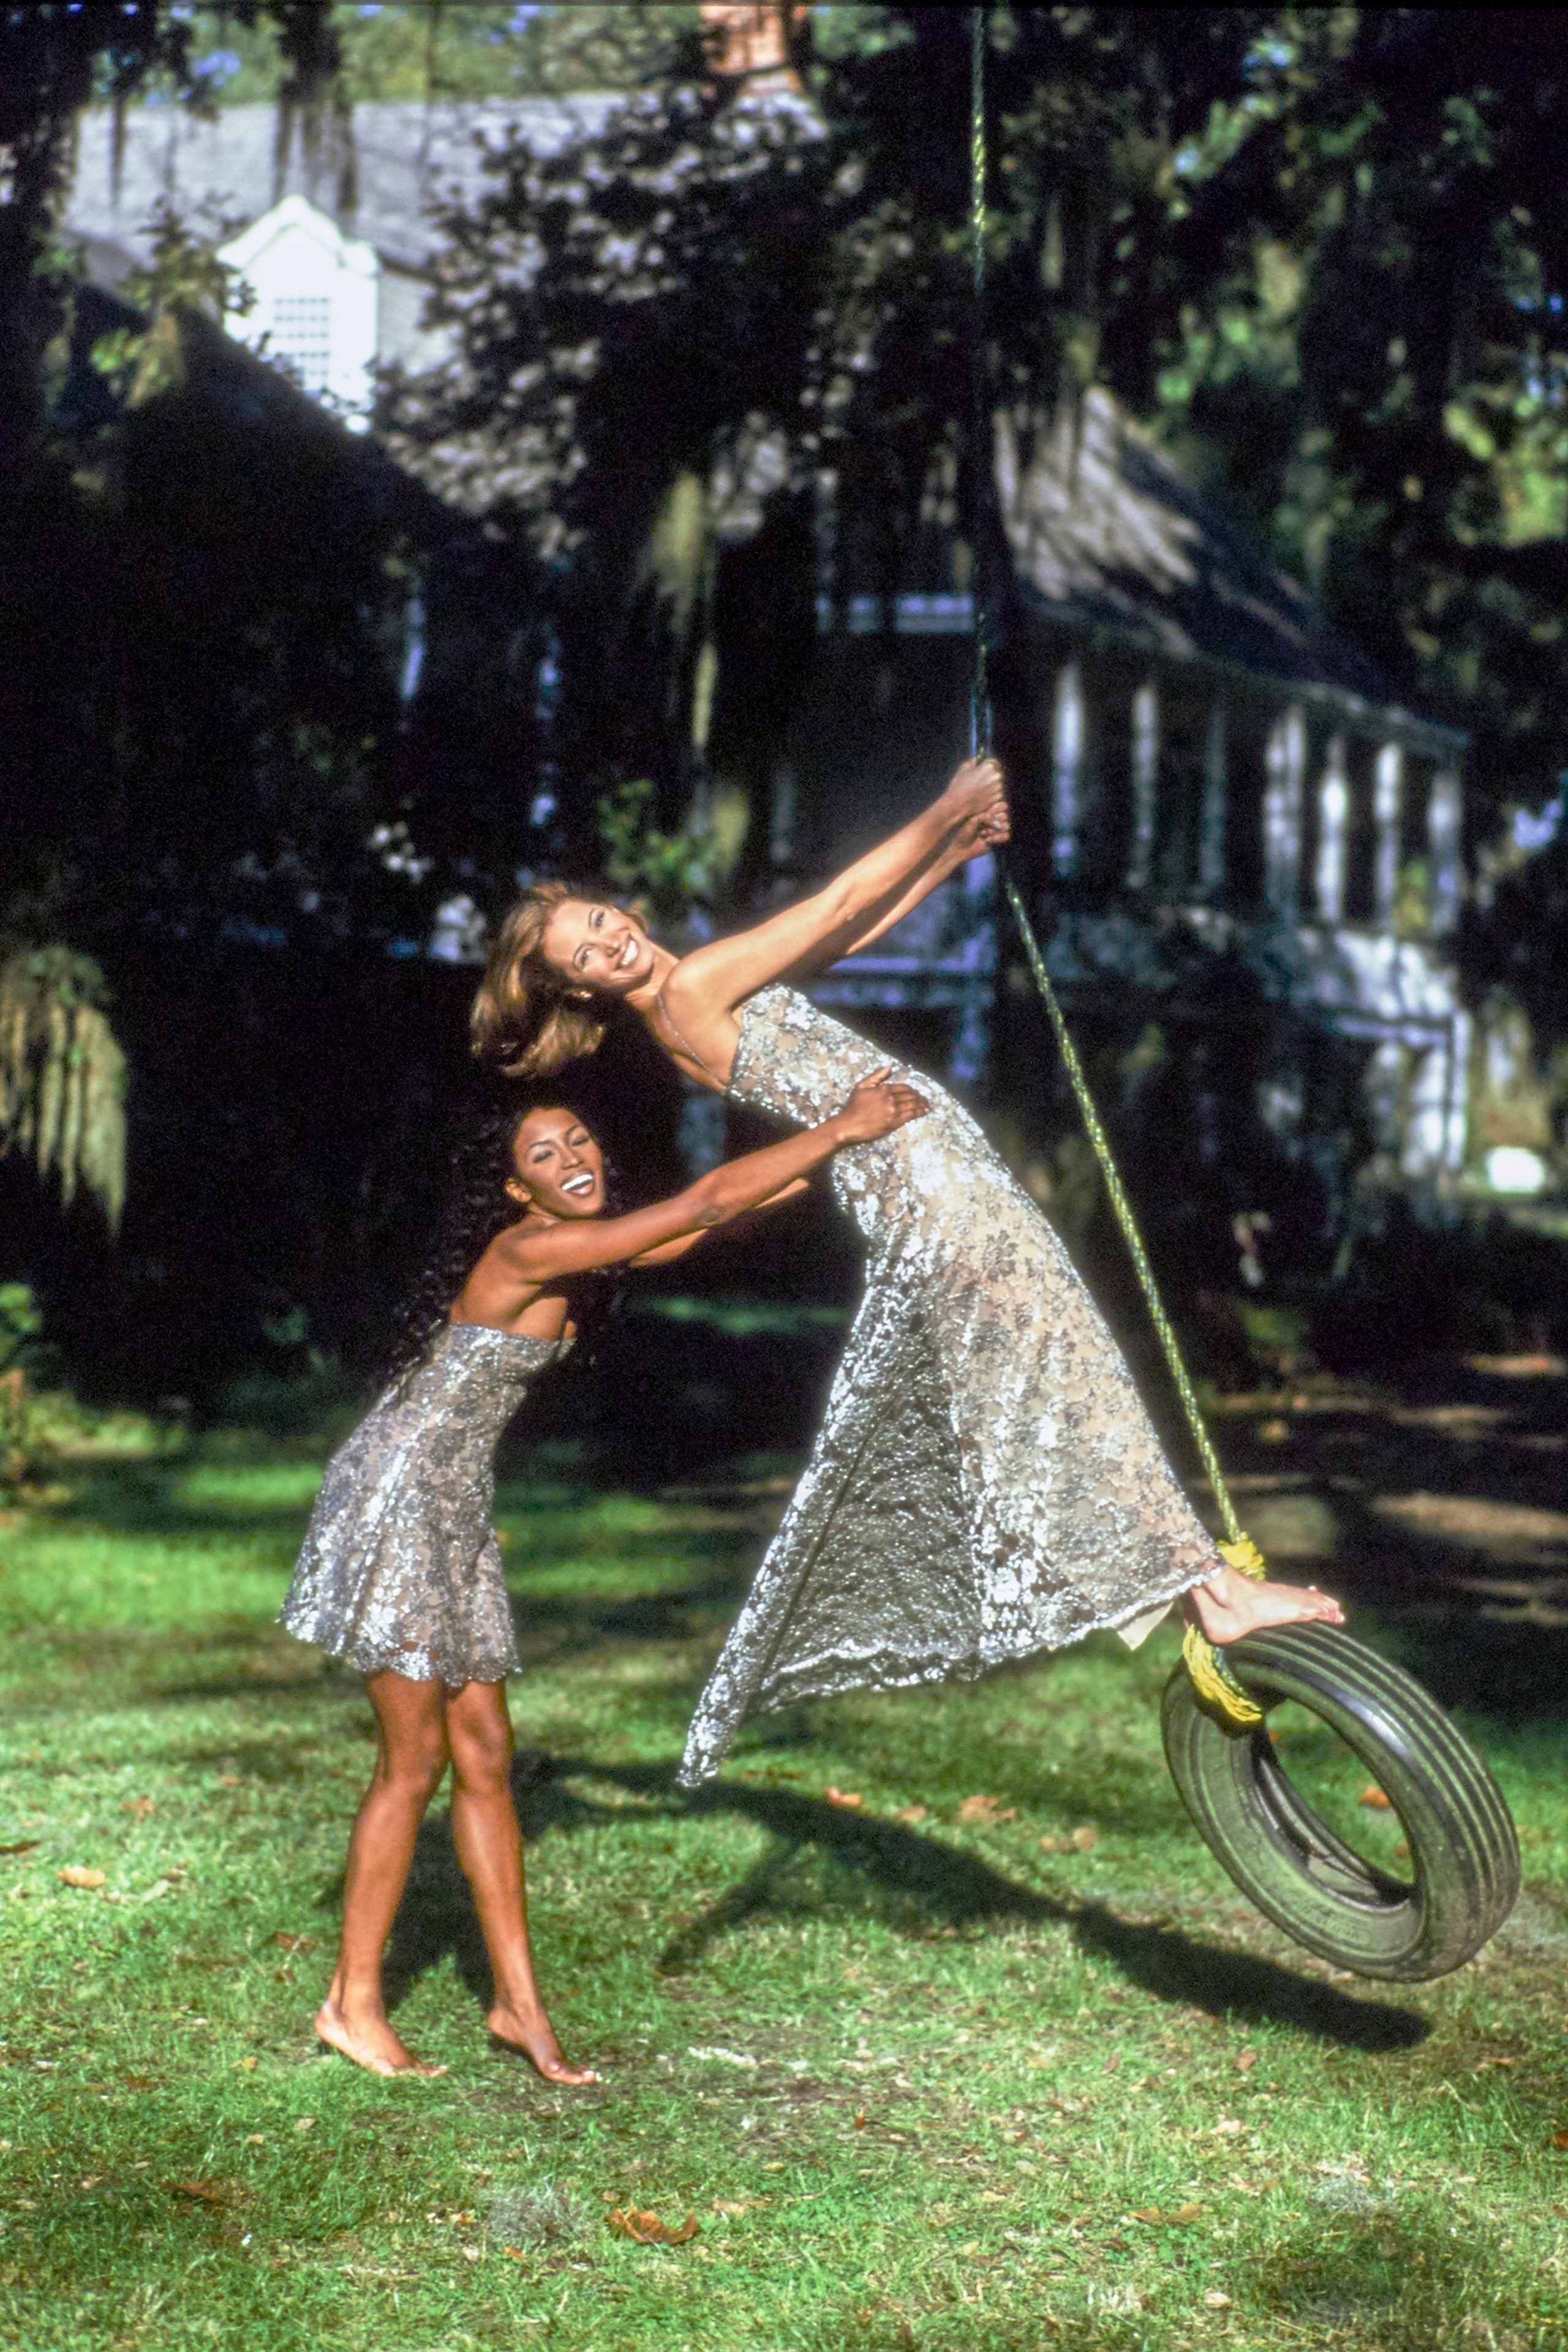 UNITED STATES  FEBRUARY 1  Models Christy Turlington  and Naomi Campbell playing on the grounds of a plantation outside...